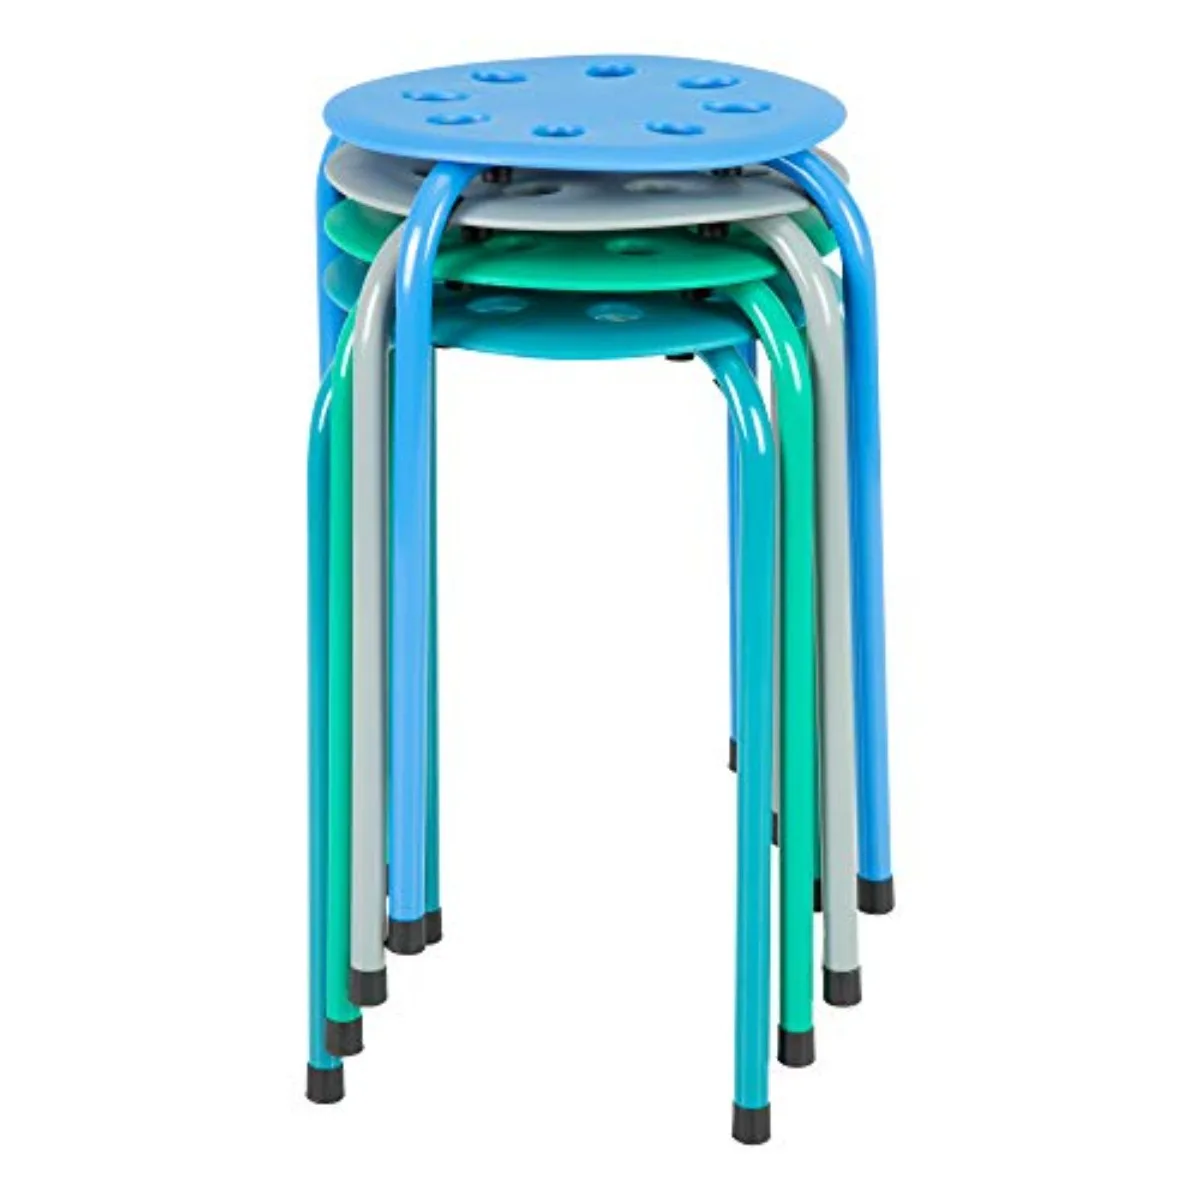 

Norwood Commercial Furniture Assorted Contemporary Stacking Stool Set Stackable Nesting Stools/Chairs Kids Adults(Pack of 4)